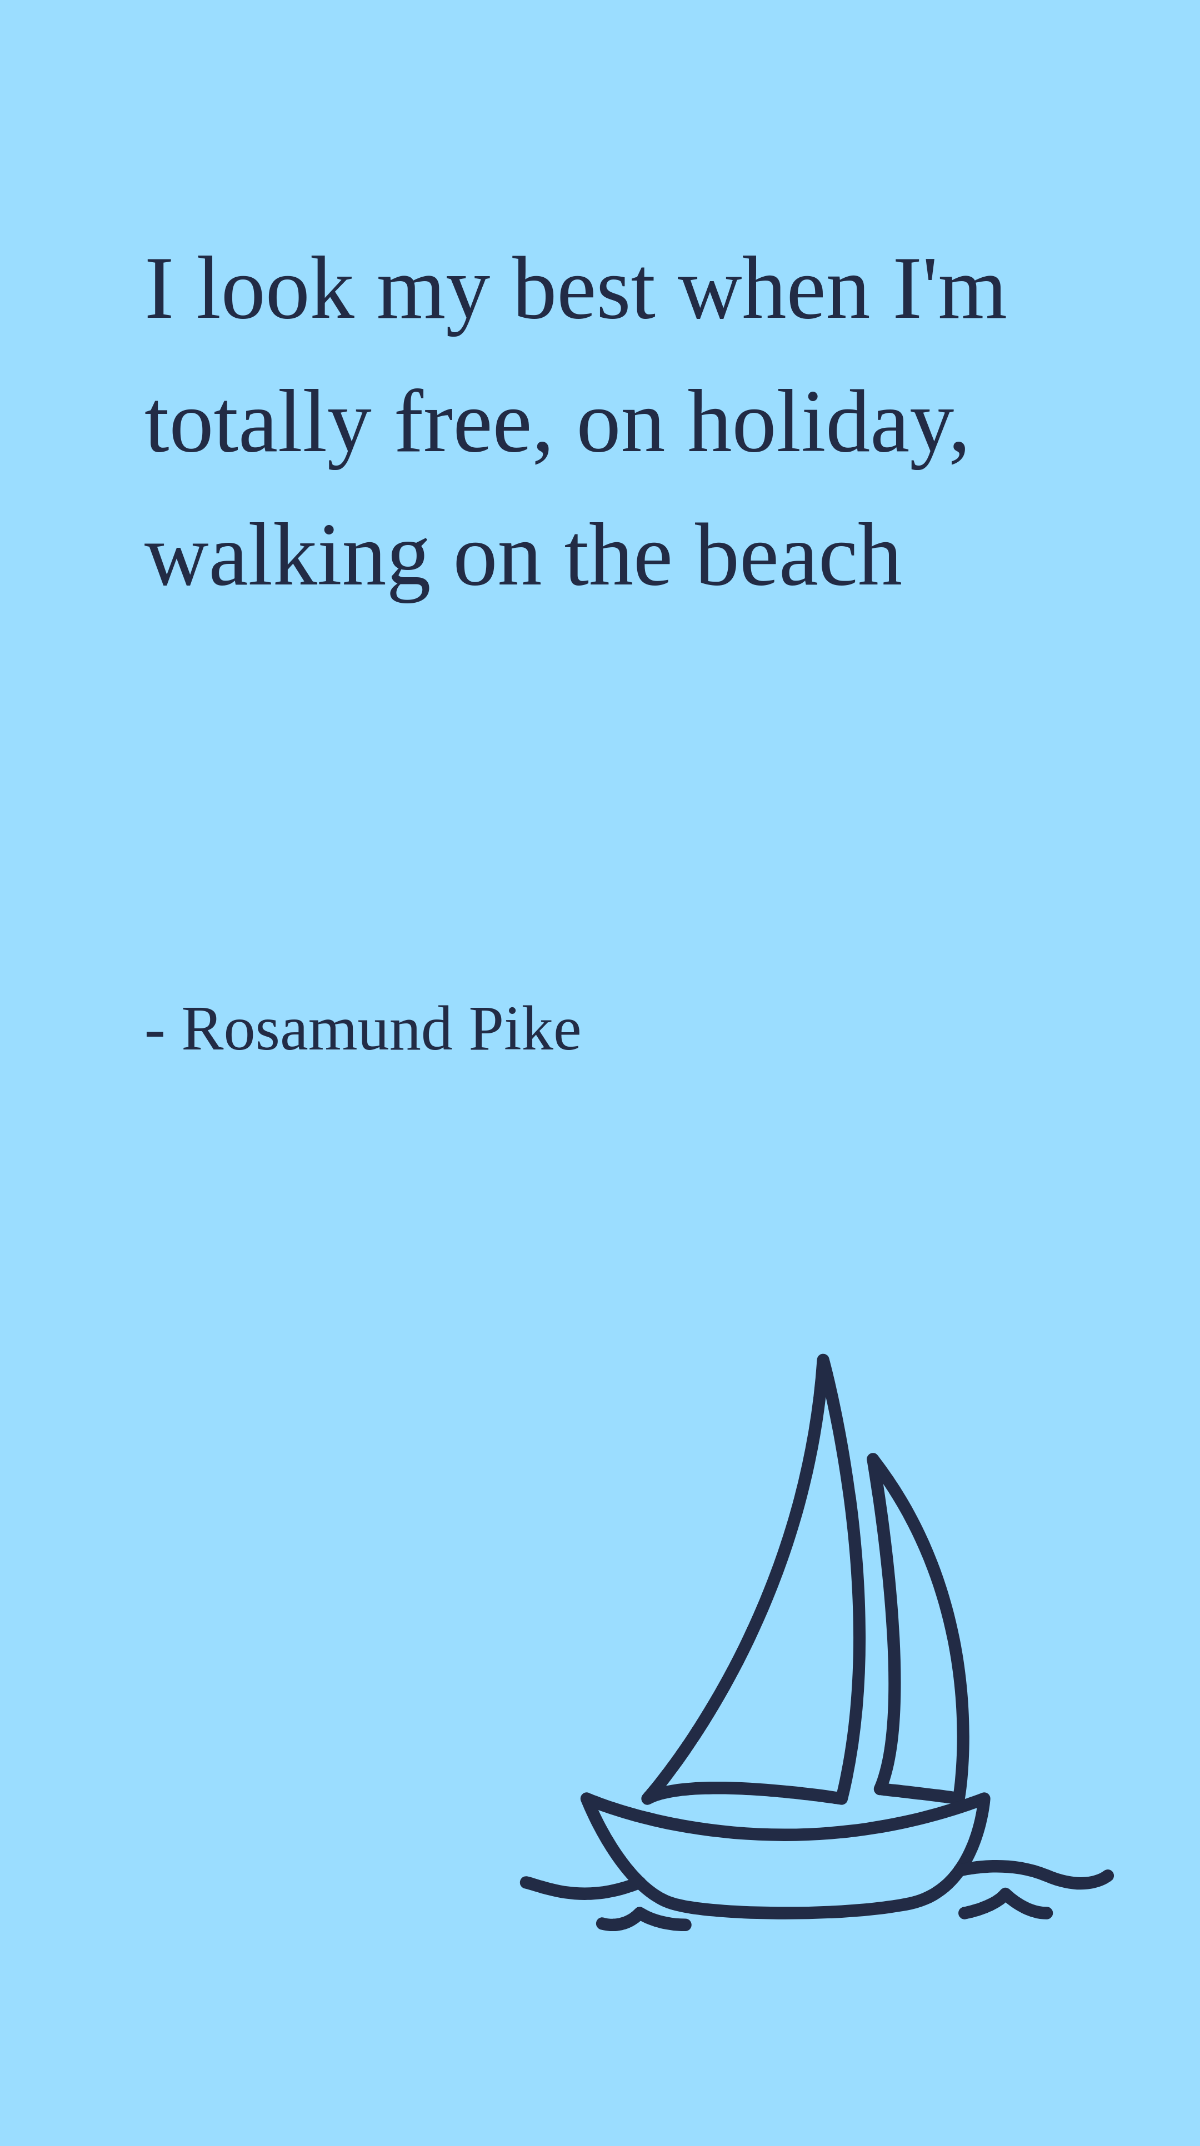 Rosamund Pike - I look my best when I'm totally free, on holiday, walking on the beach Template